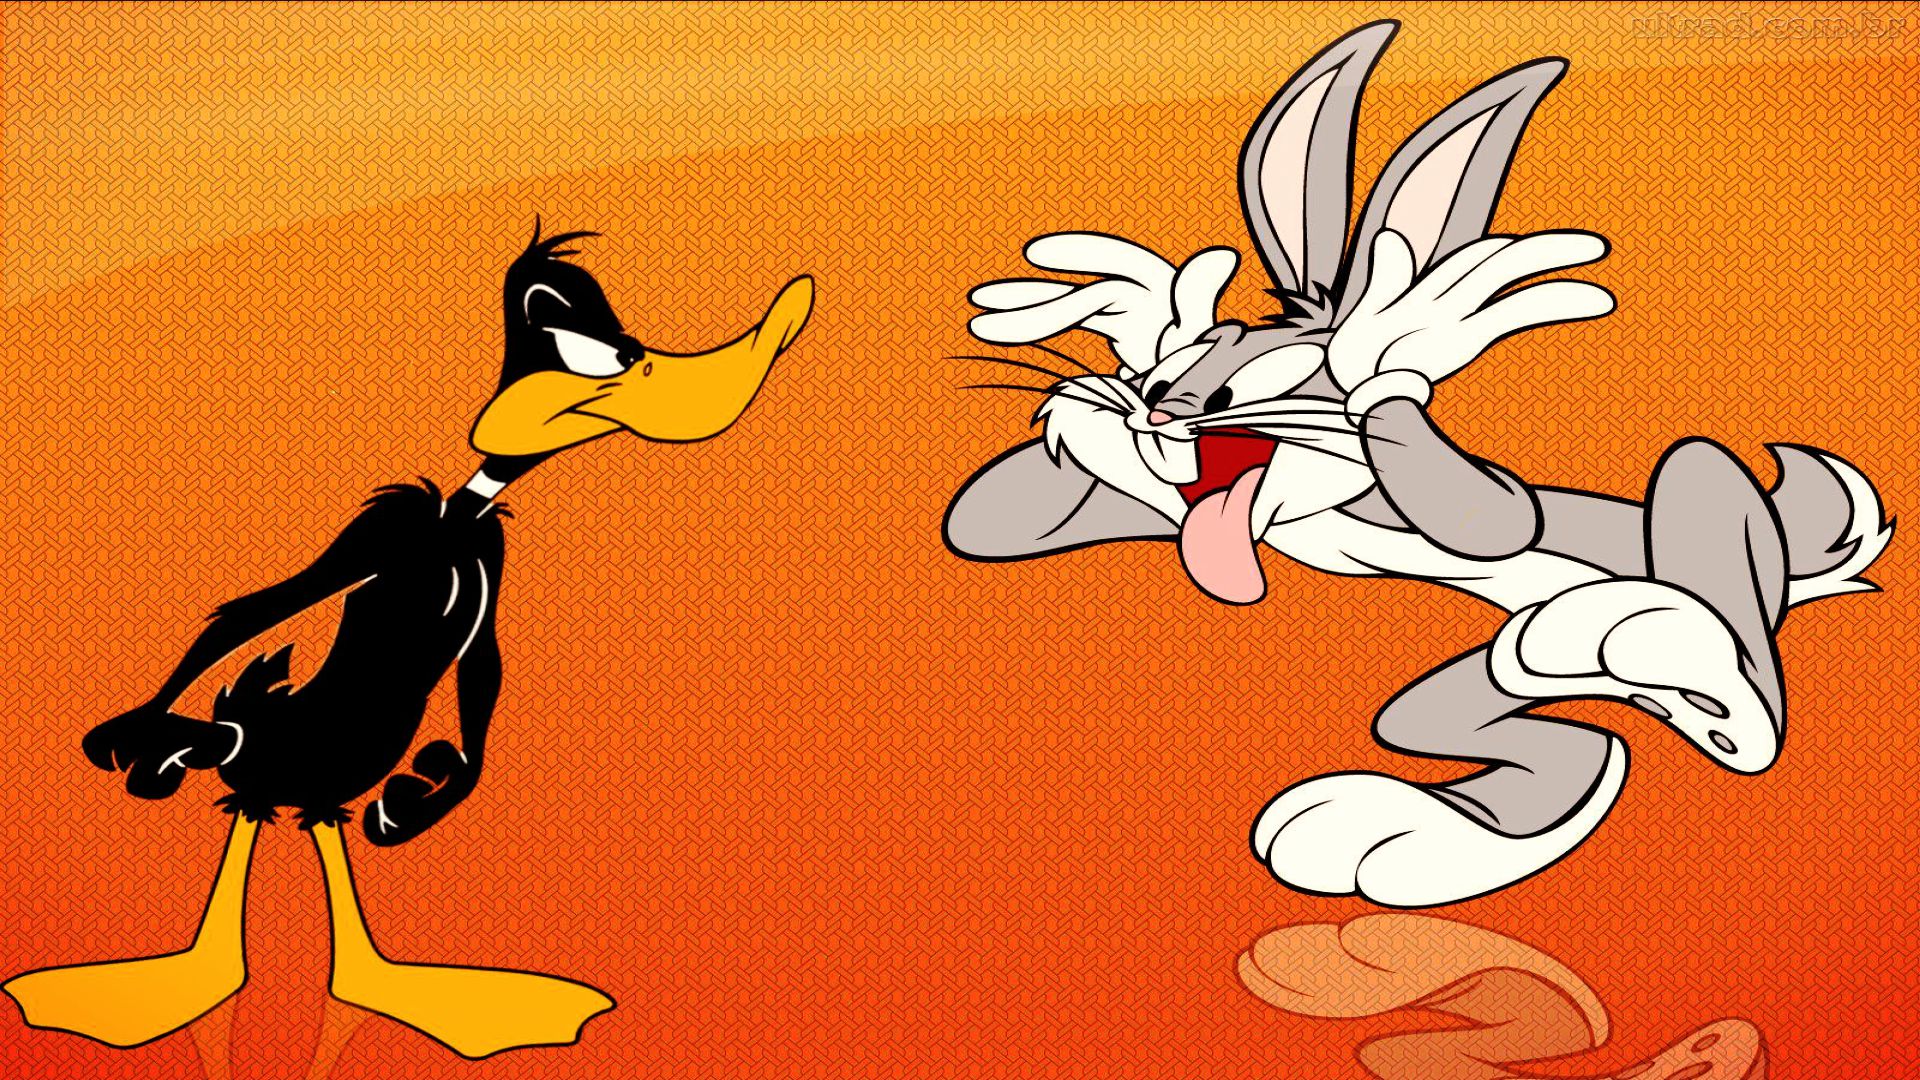  Looney Tunes Looney Tunes Clan Pictures HD Walls Find Wallpapers 1920x1080